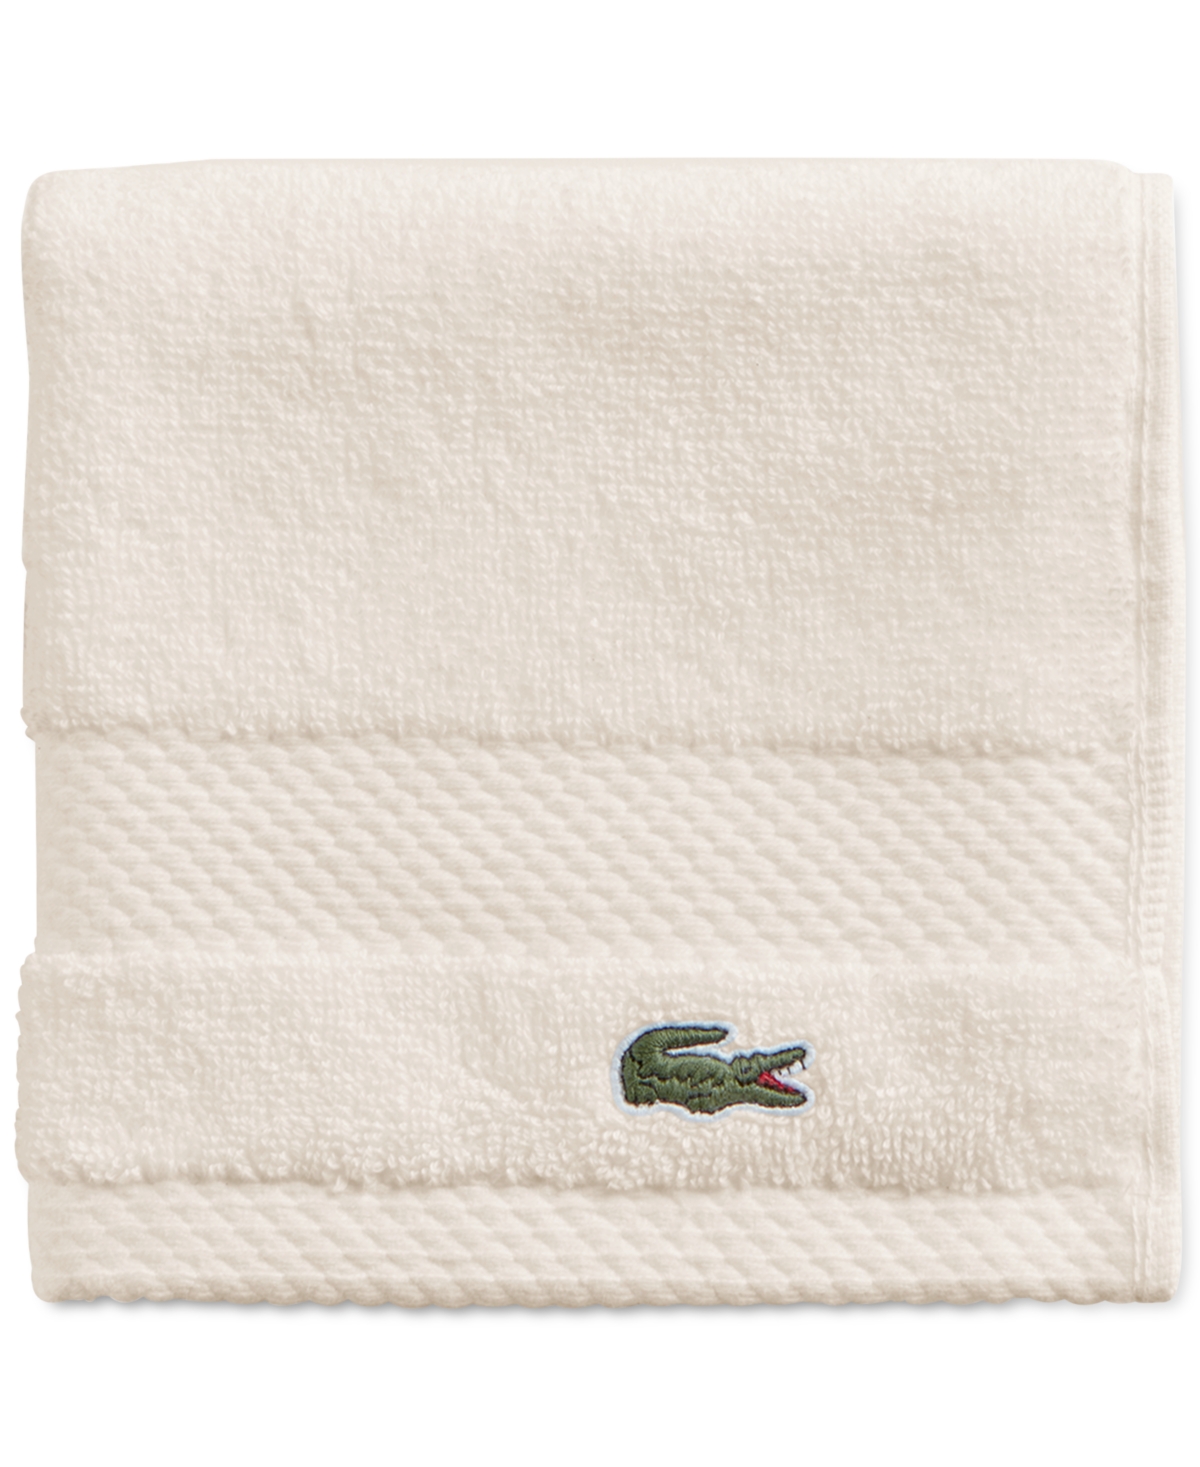 Lacoste Home Heritage Anti-microbial Supima Cotton Washcloth, 13" X 13" In Chalk